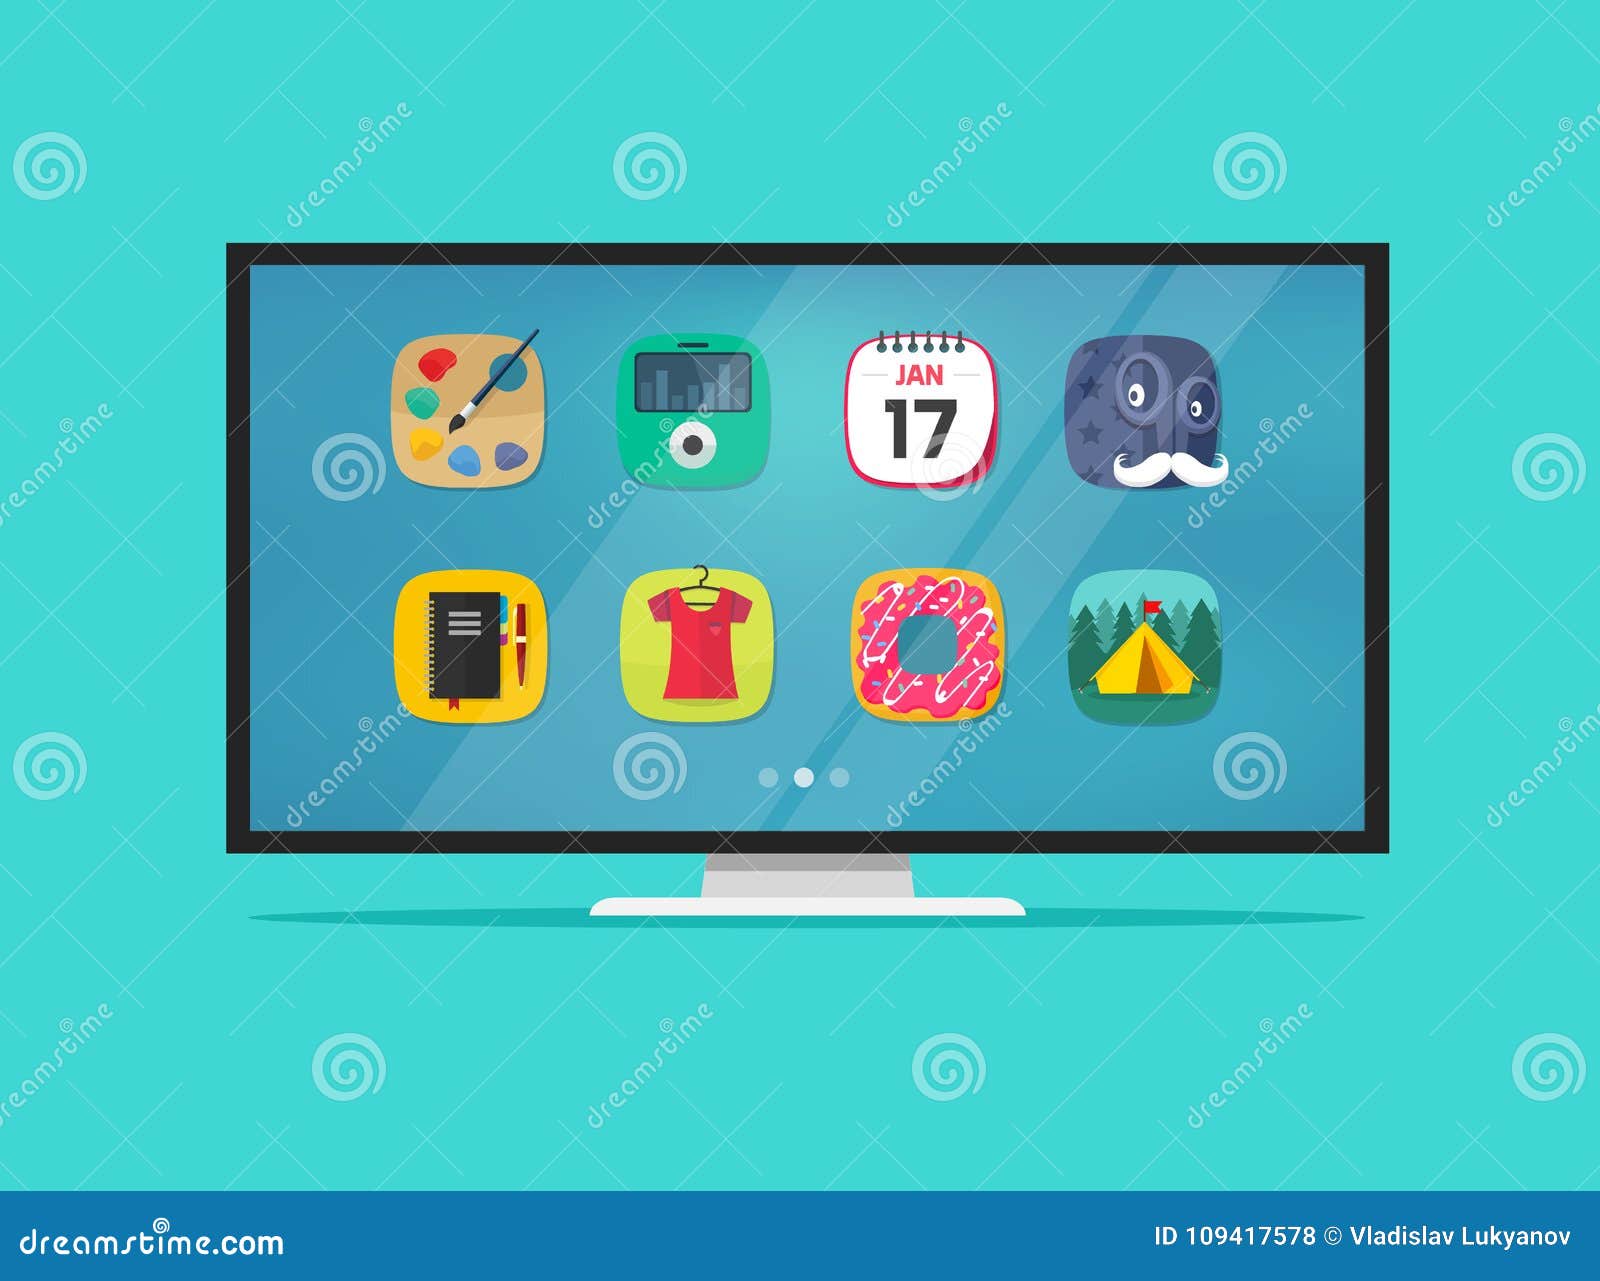 Smart Television Display Vector Illustration Isolated, Cartoon Design of  Flat Screen Tv with Smart Technology App Icons Stock Vector - Illustration  of communication, cinema: 109417578